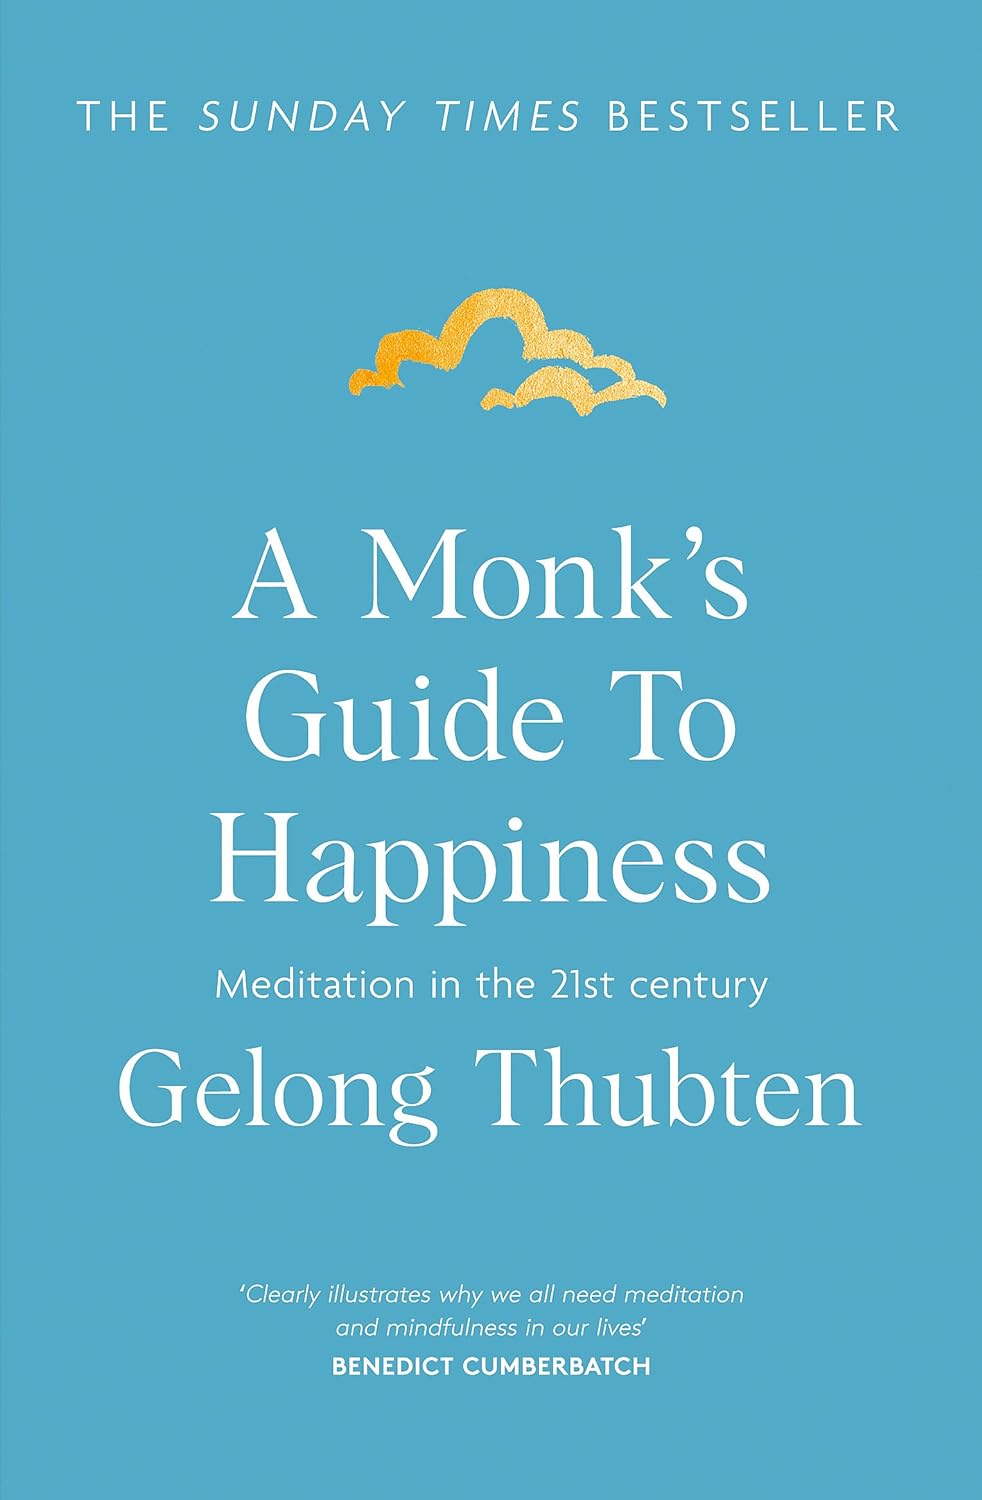 A Monk's Guide to Happiness: Meditation in the 21st Century, by Gelong Thubten